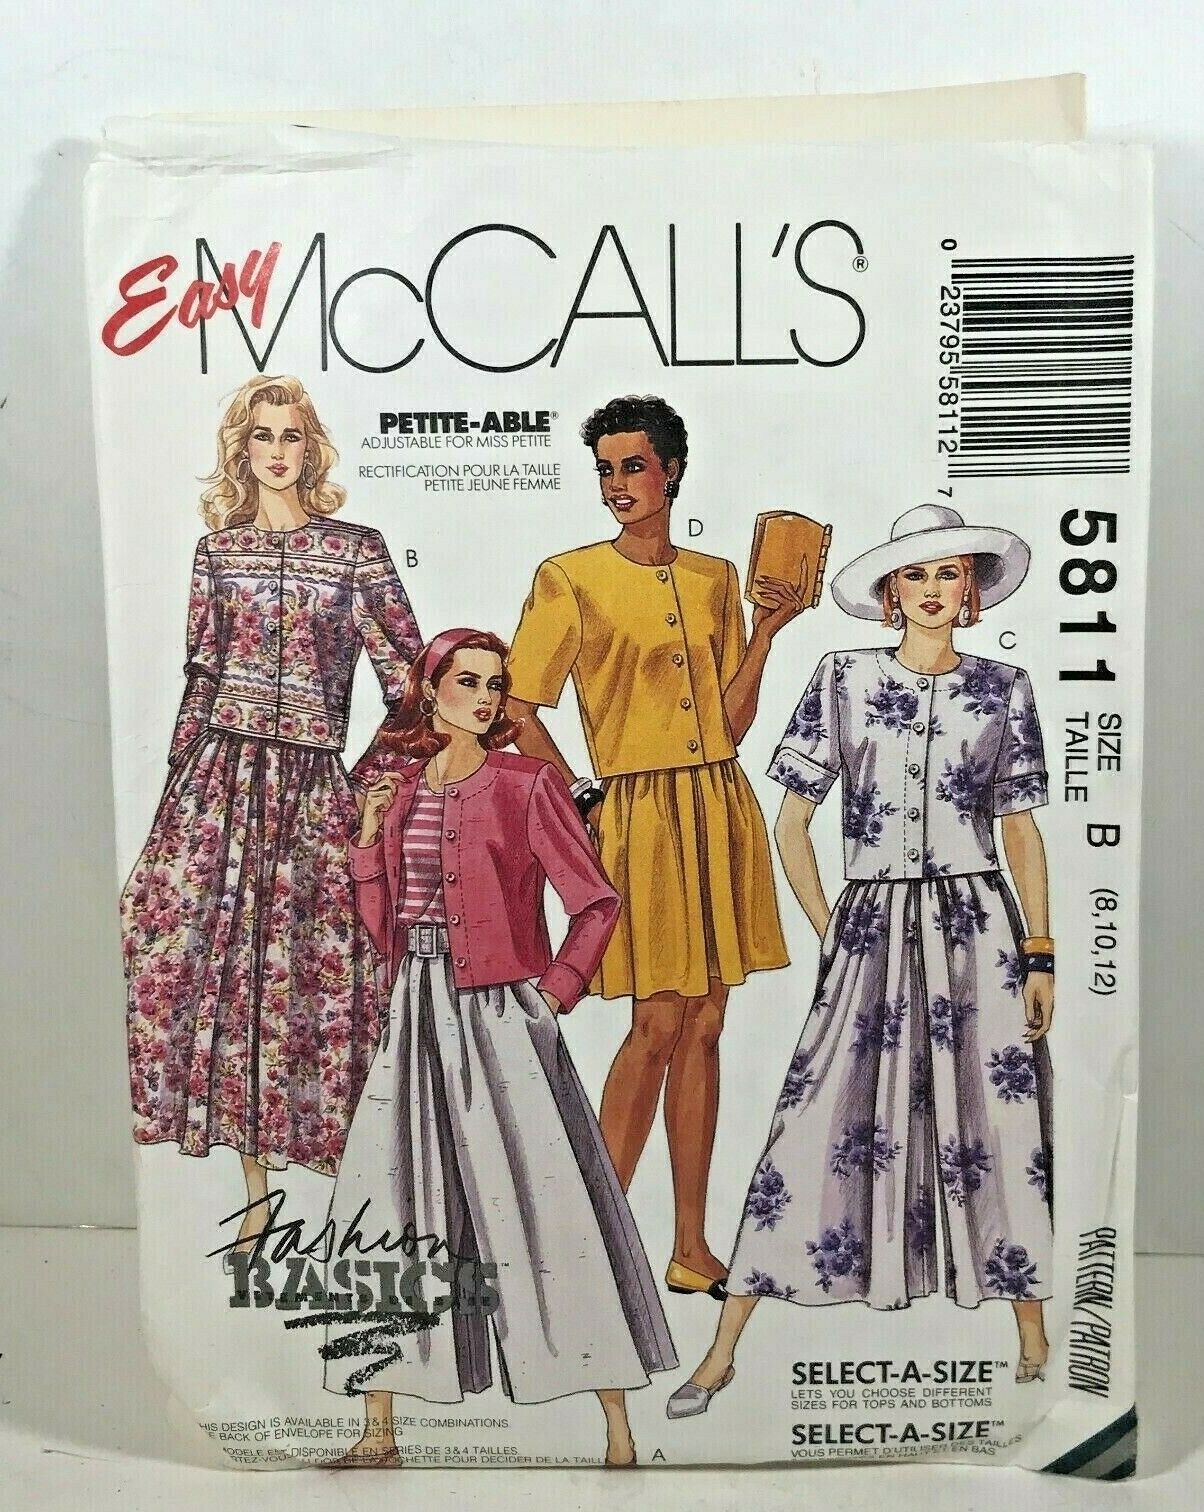 Vintage Sewing Pattern Misses Two Piece Dresses McCalls 5811